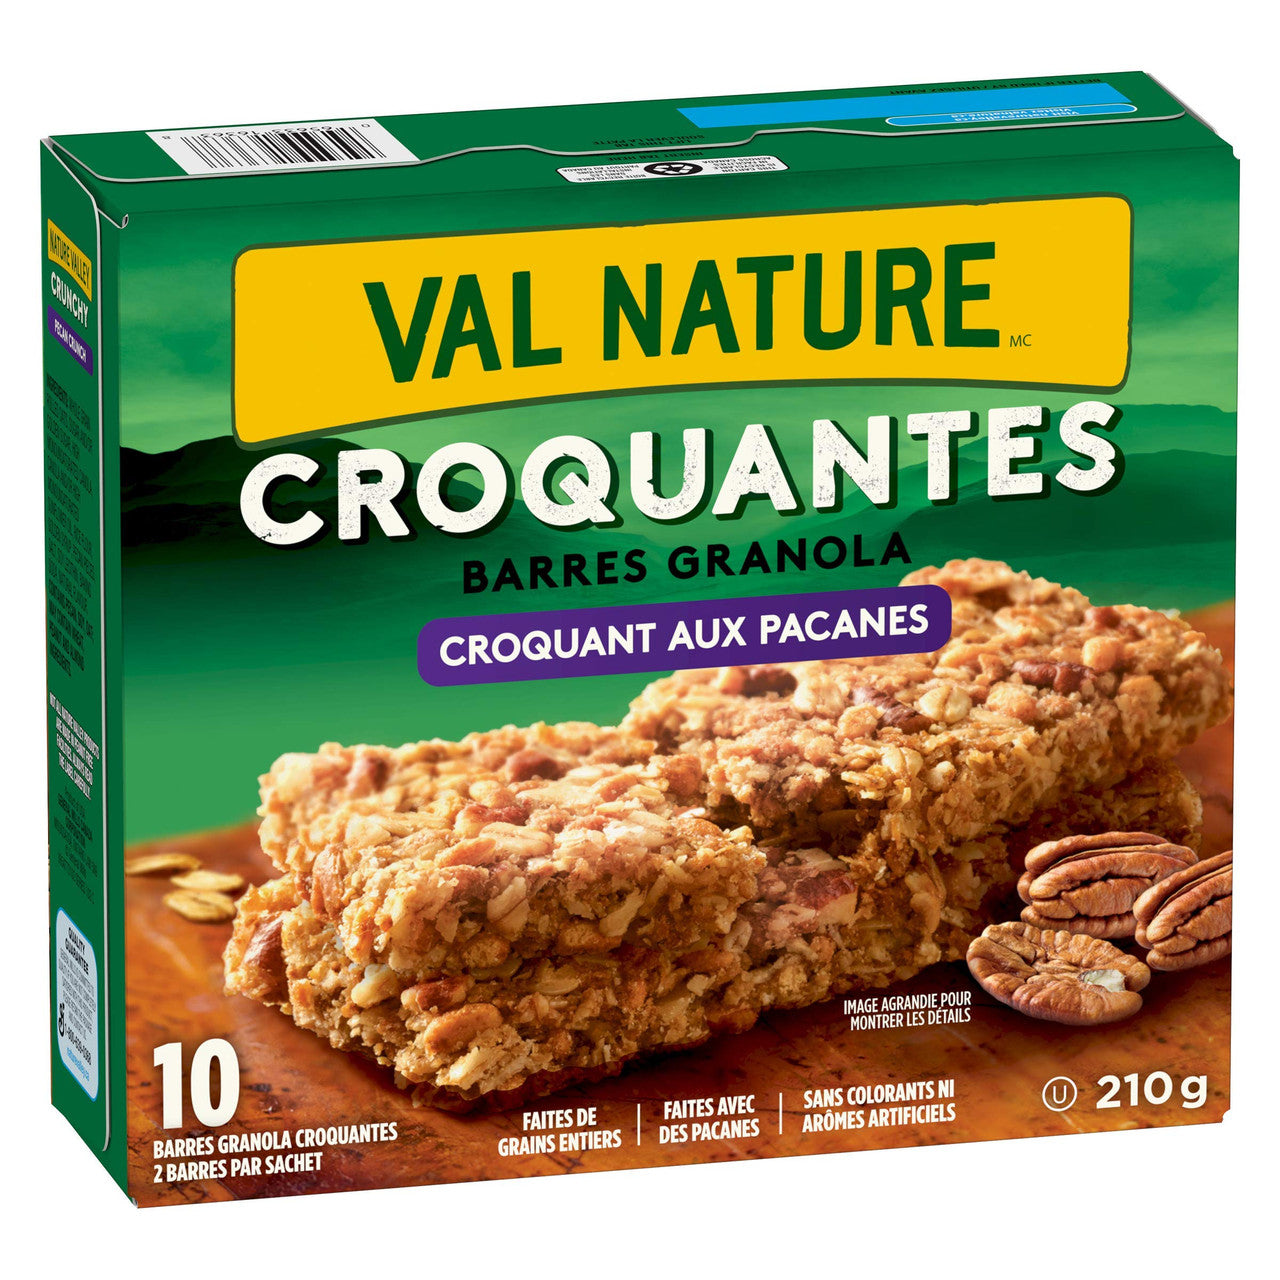 Nature Valley Crunchy Granola Bars Pecan Crunch,(10ct Box), 210g/7.4 oz., {Imported from Canada}